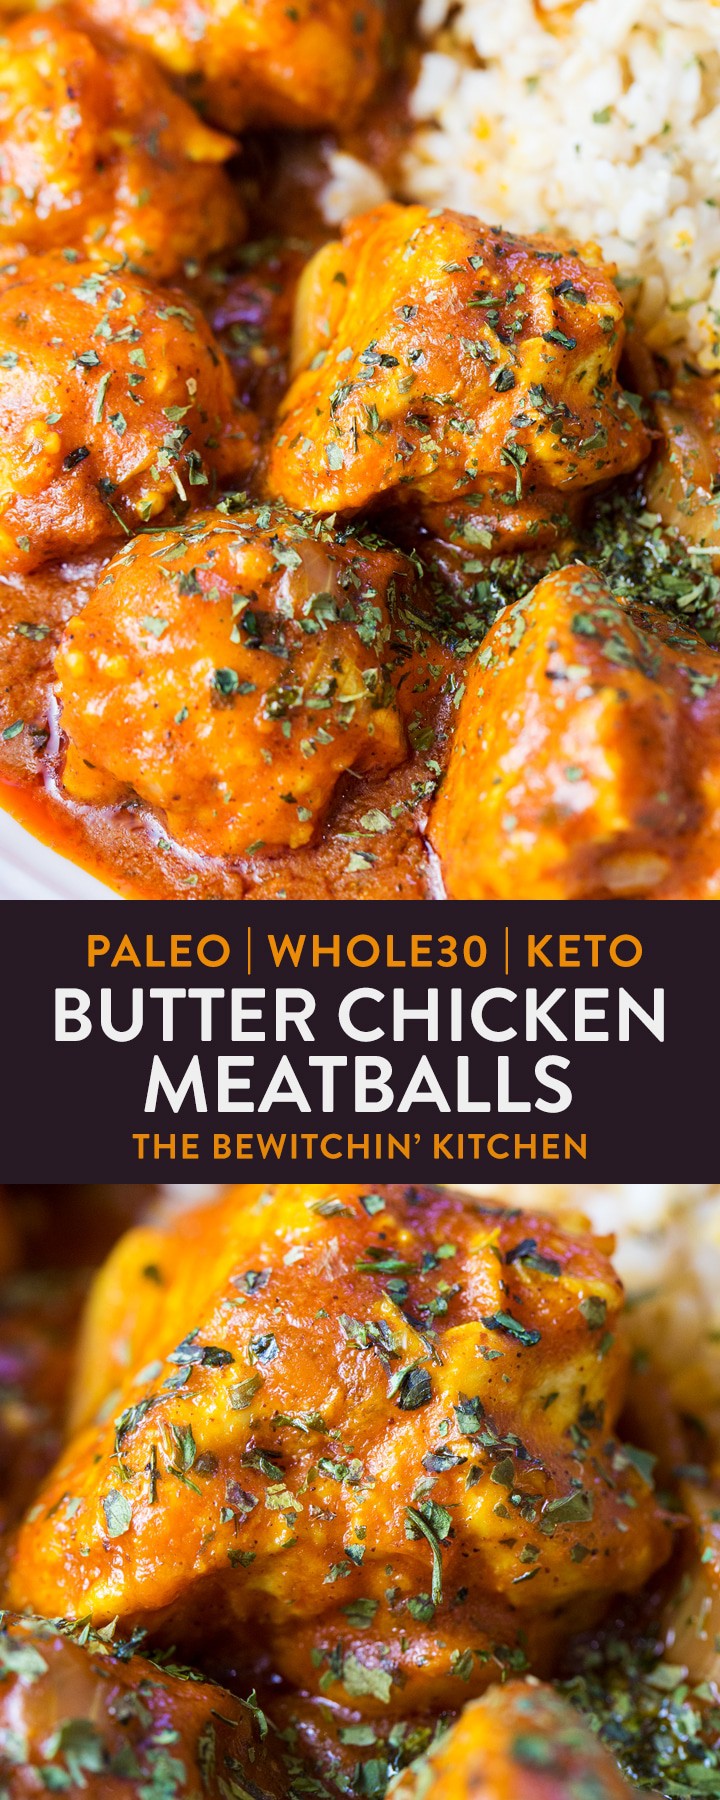 Whole30 Butter Chicken Meatballs | The Bewitchin' Kitchen